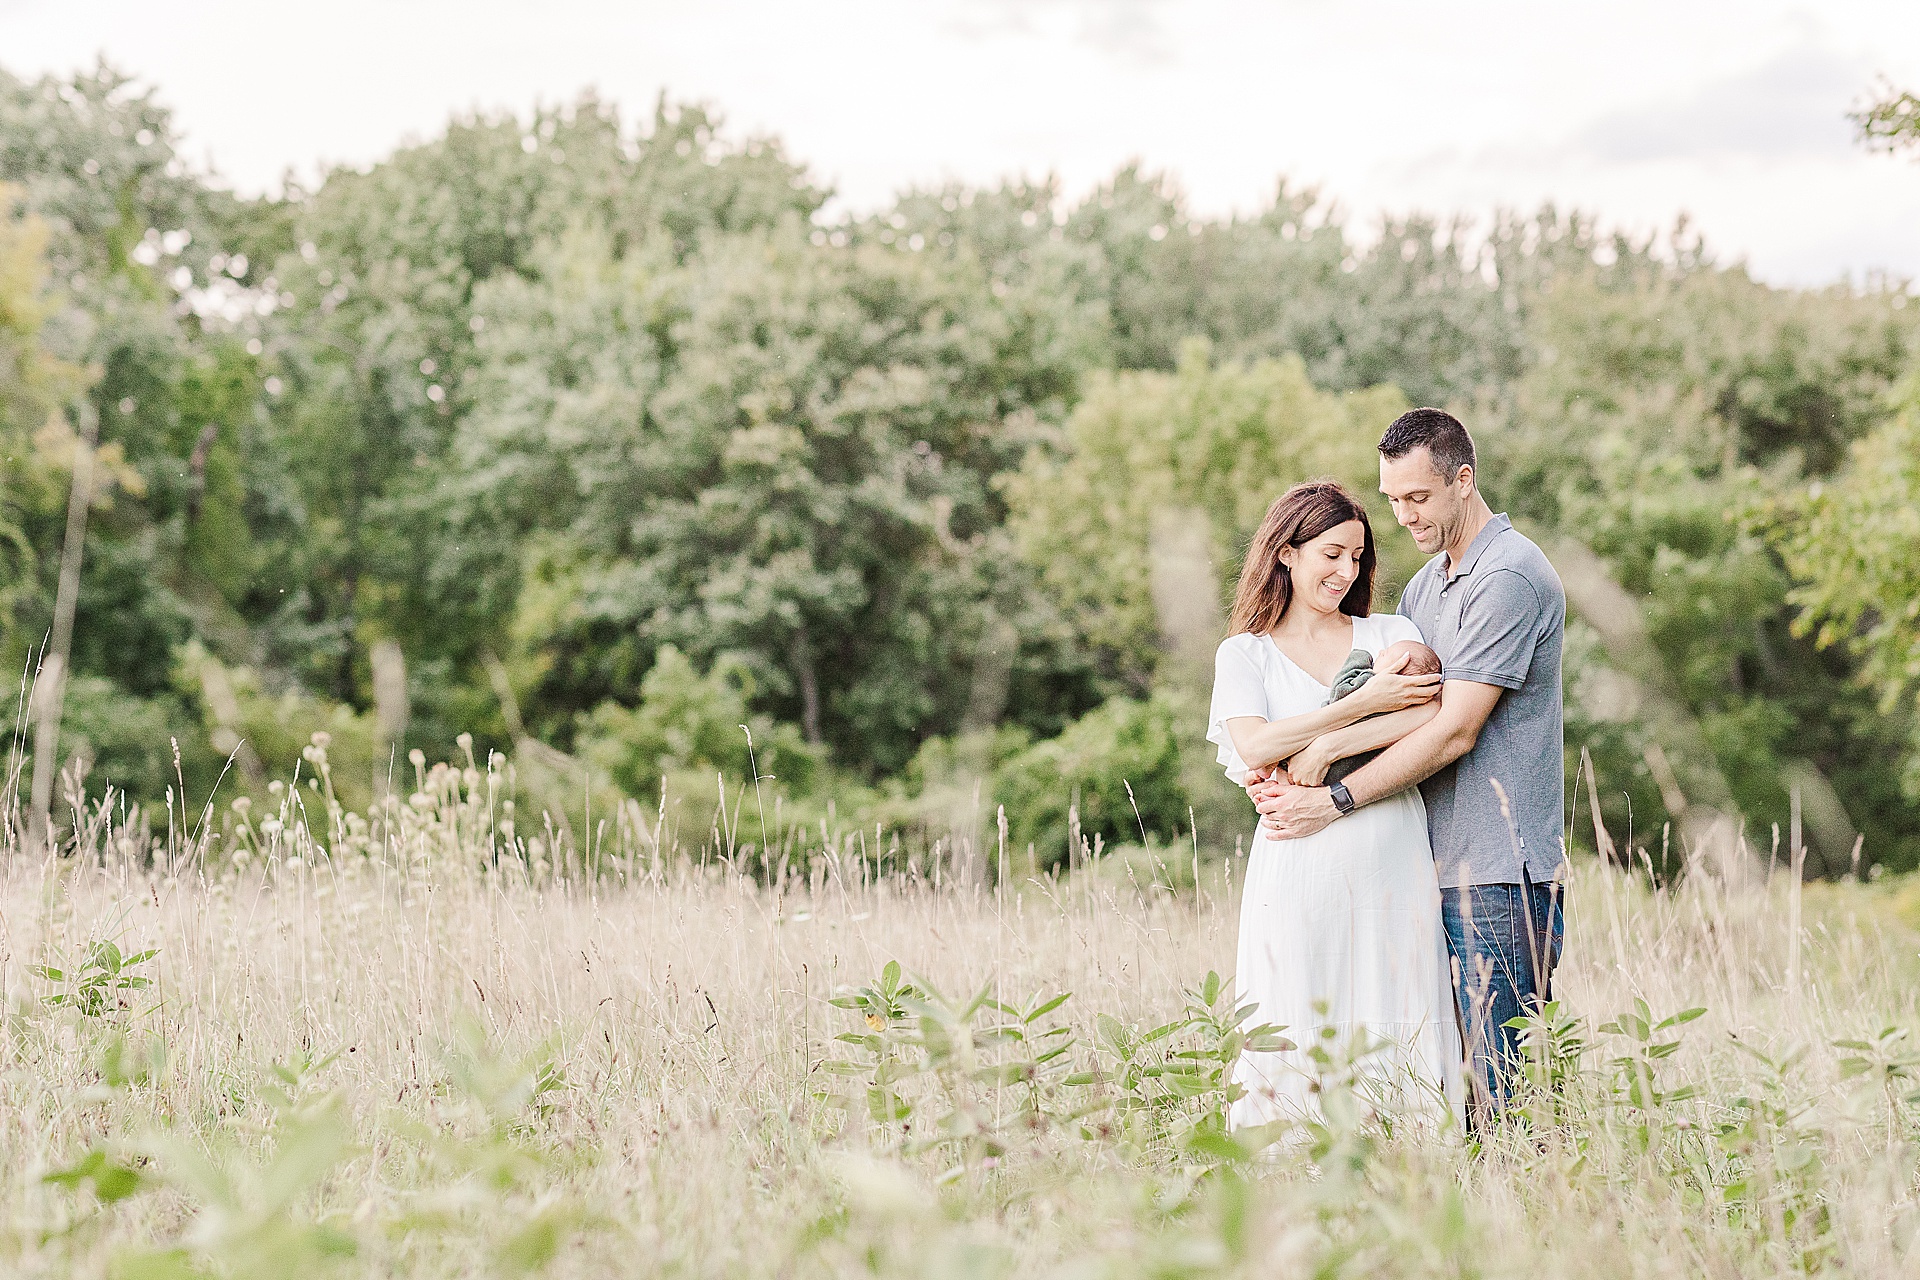 Parents hold newborn in field of tall grass during outdoor newborn photo session with Sara Sniderman Photography at Heard Farm, Wayland Massachusetts